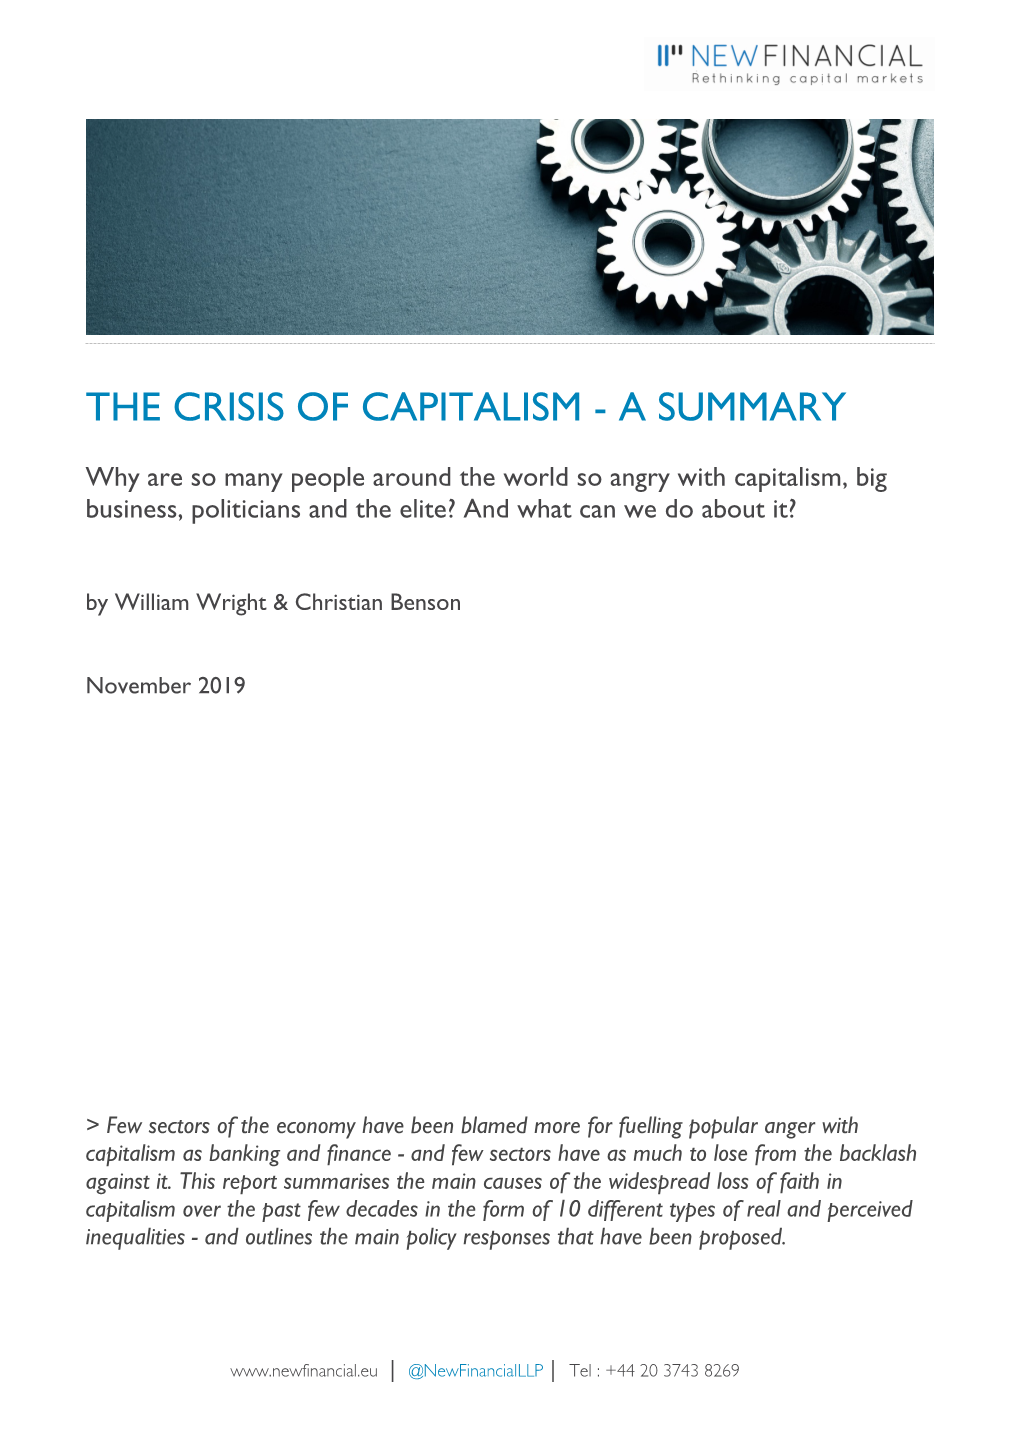 The Crisis of Capitalism - a Summary